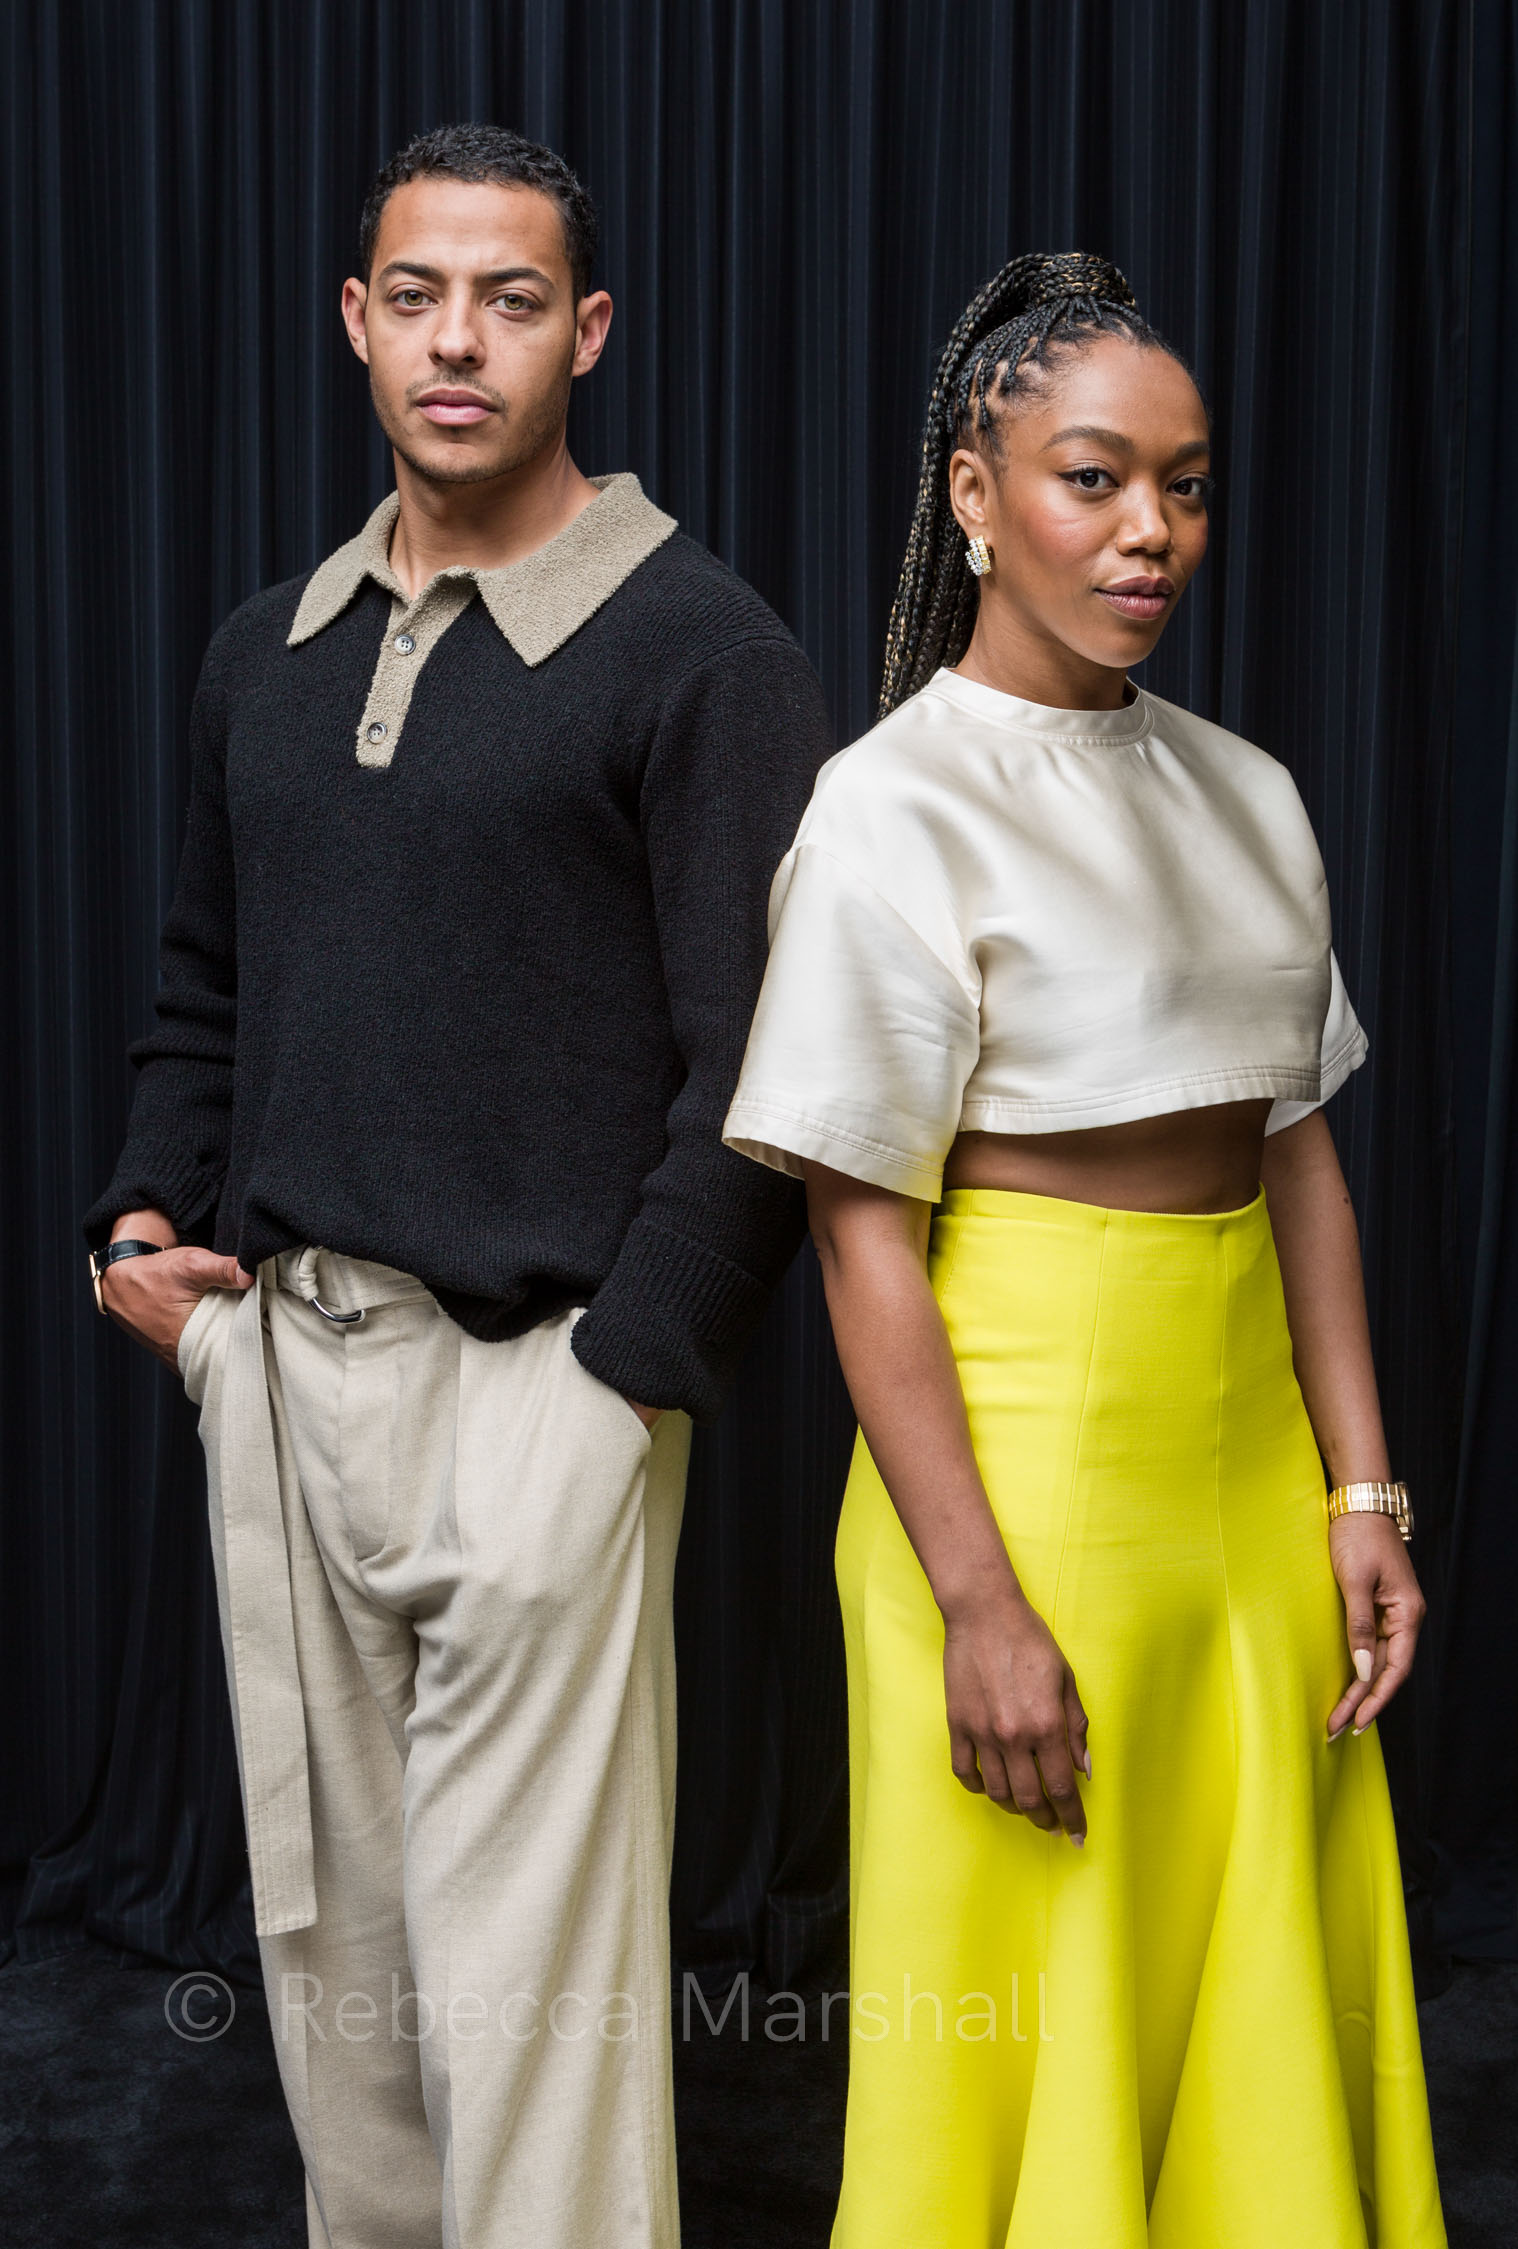 Double portrait of actors Daryl McCormack and Naomi Ackie in front of a black curtain